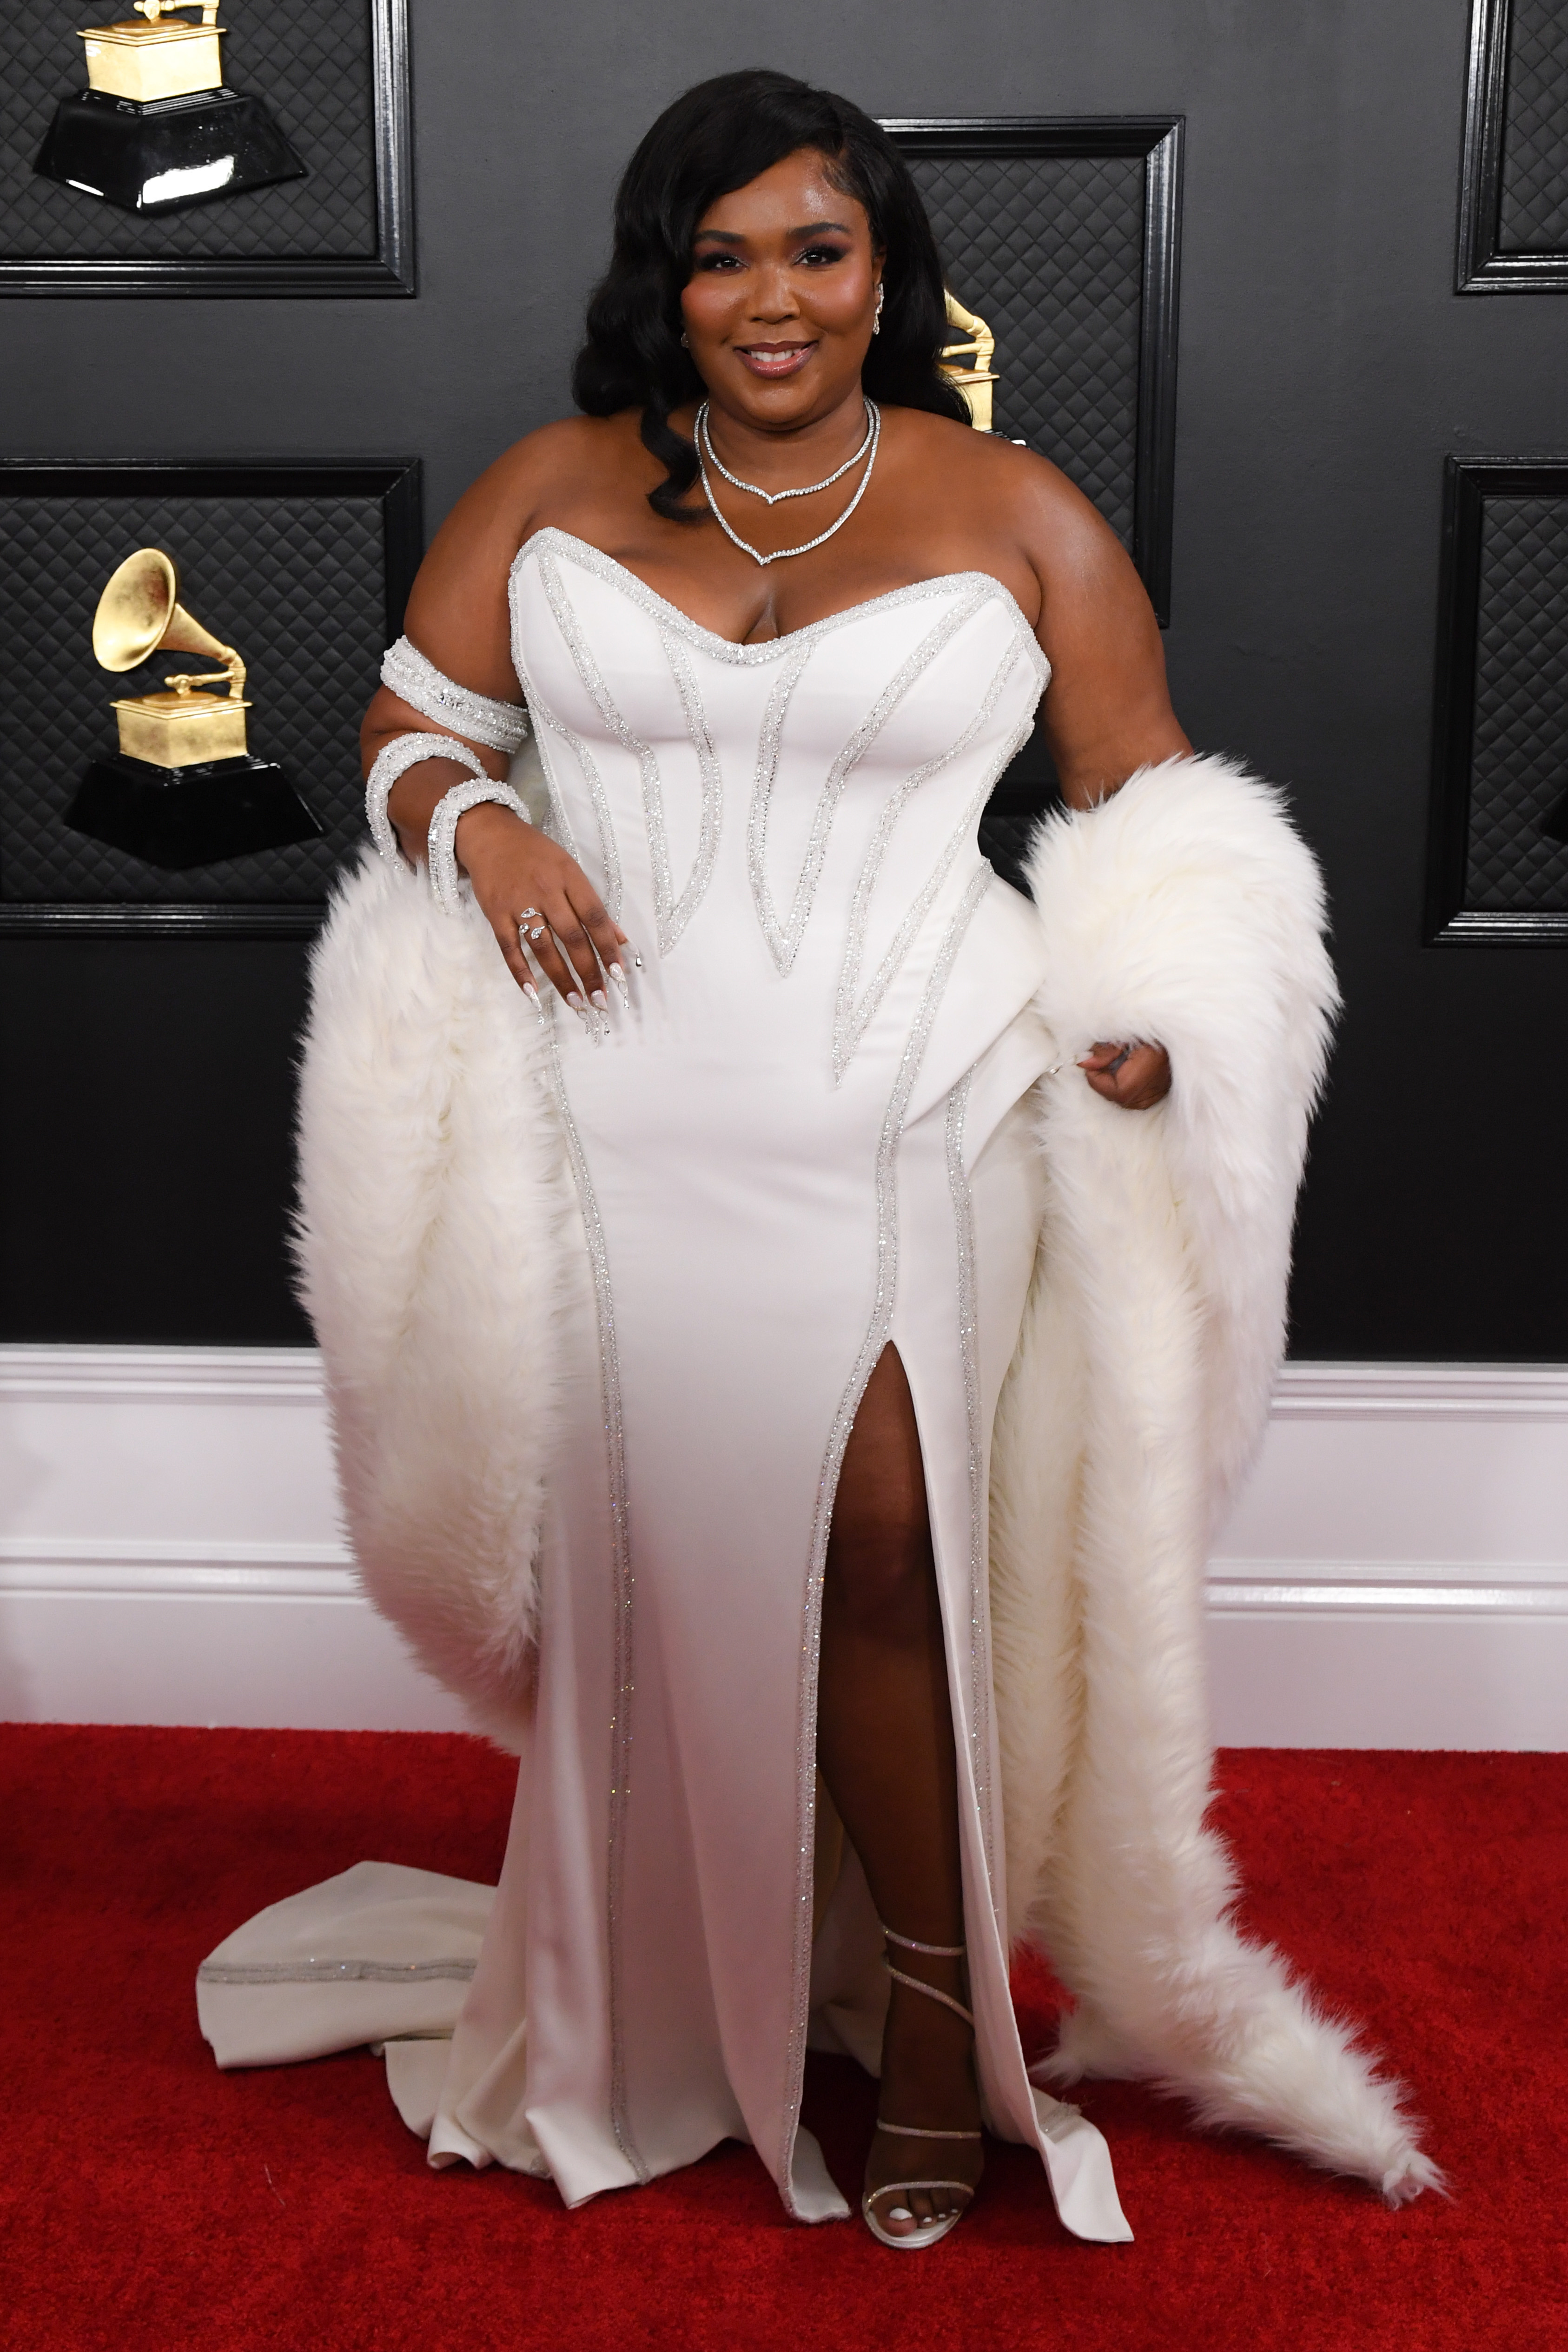 Lizzo's Grammys 2020 Look: See Photos of Her Stunning Dress